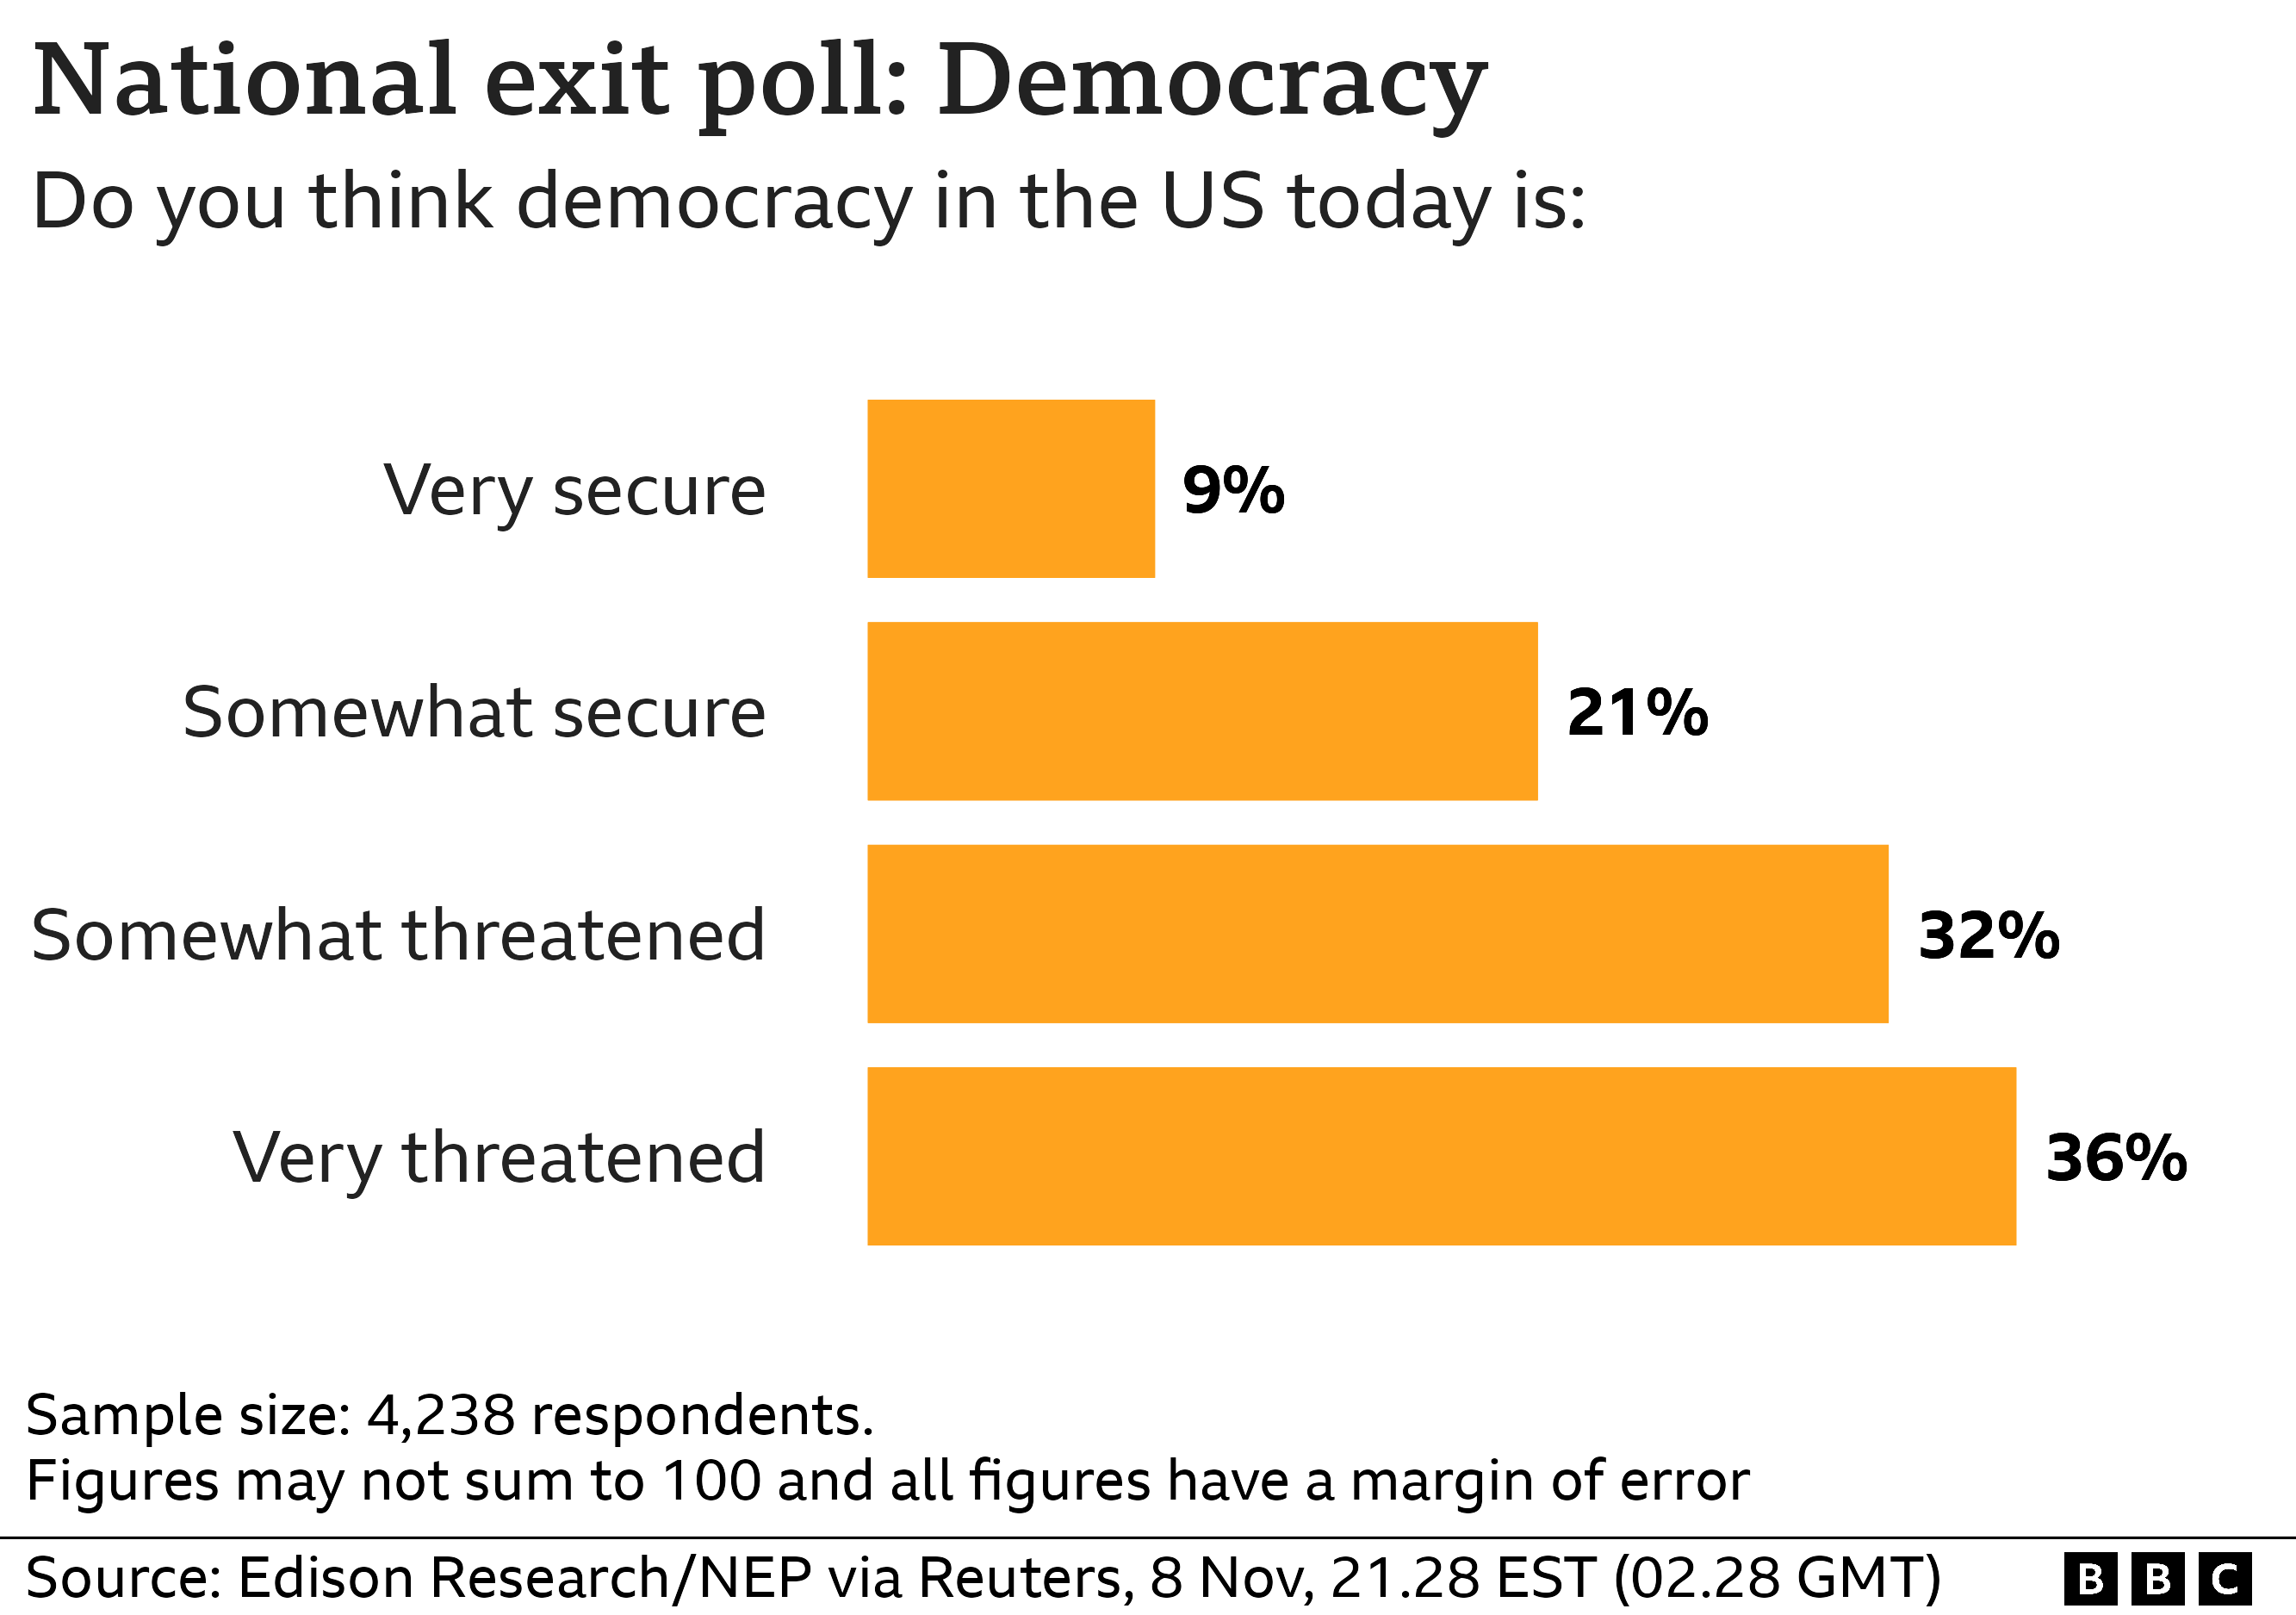 Exit poll: Do you think democracy in the US today is: Very secure 9%, Somewhat secure: 21%, Somewhat threatened: 32%, Very threatened: 36%